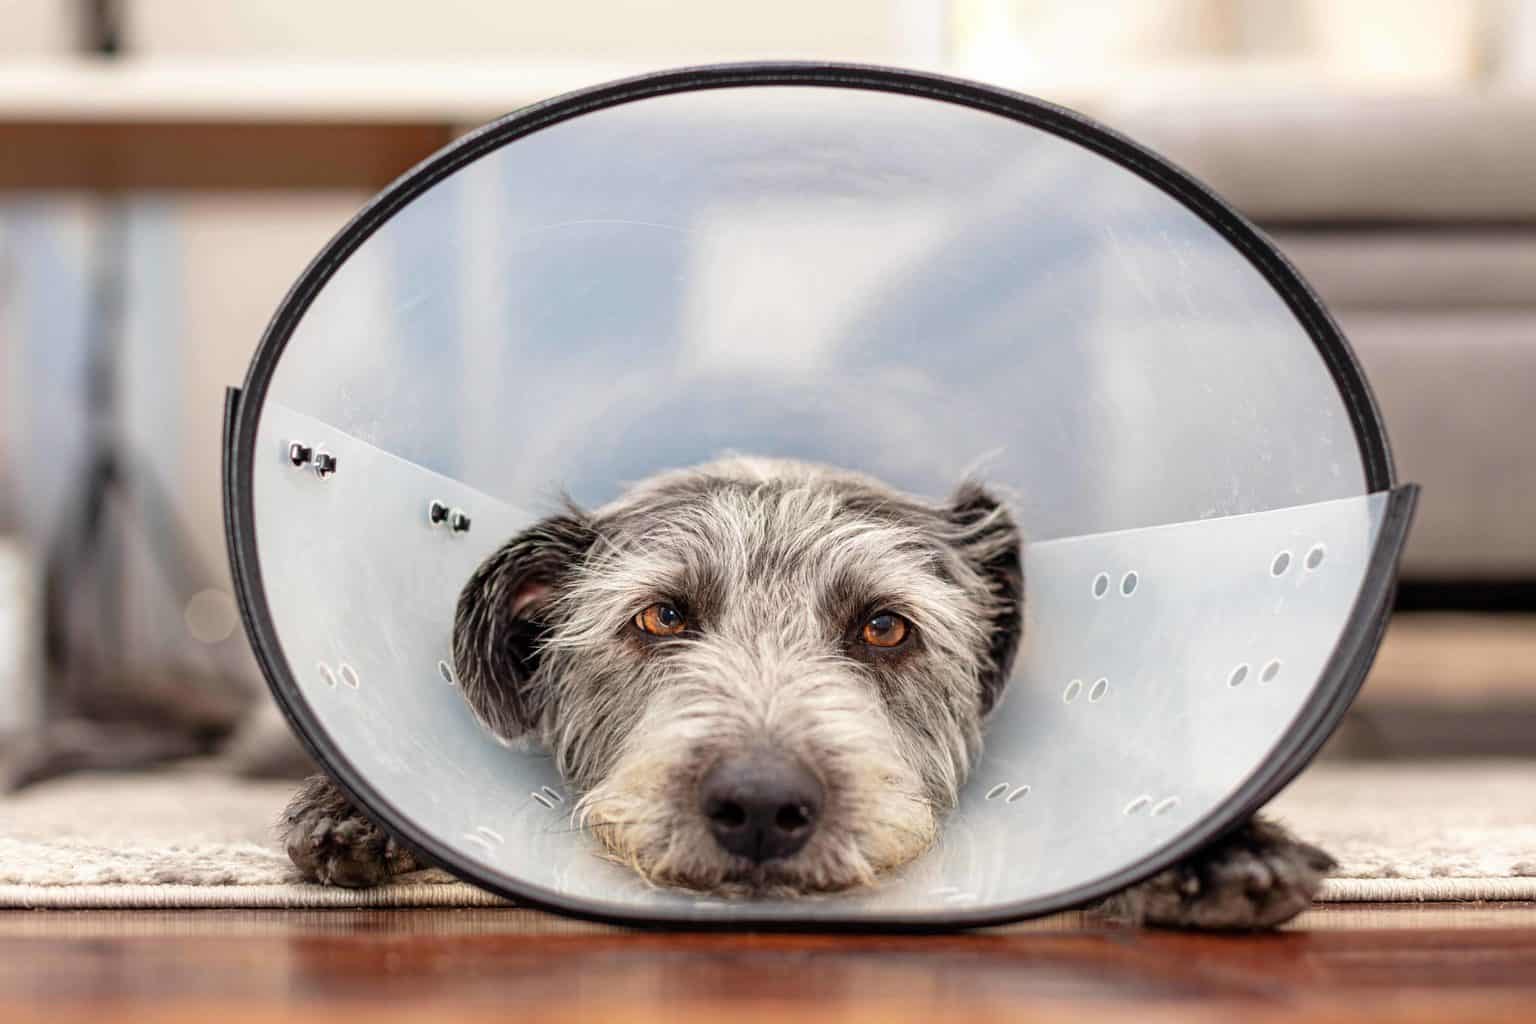 Sad dog wears e-collar. Be proactive to prevent canine injuries. If your dog is hurt, learn what steps to take. Reduce the risk of car crashes, choking hazards.